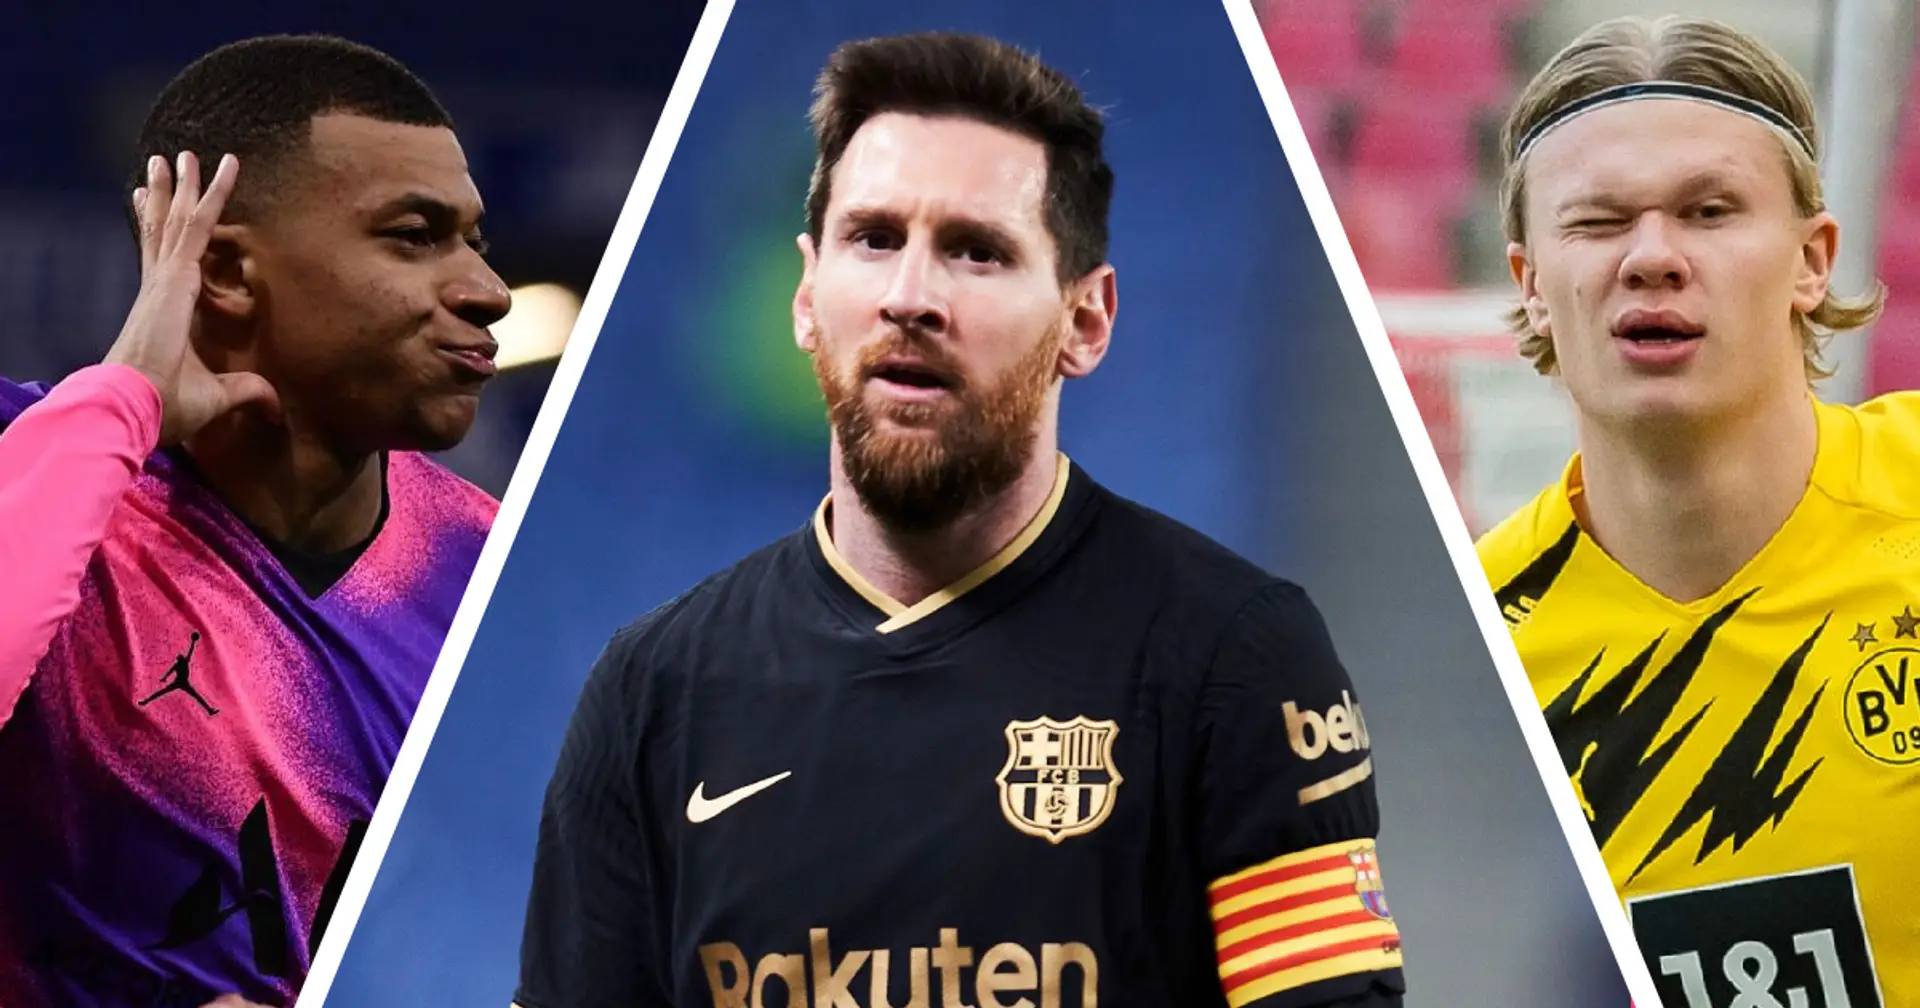 European Golden Boot race: Messi slips down to 6th, Mbappe and Haaland now in top 5